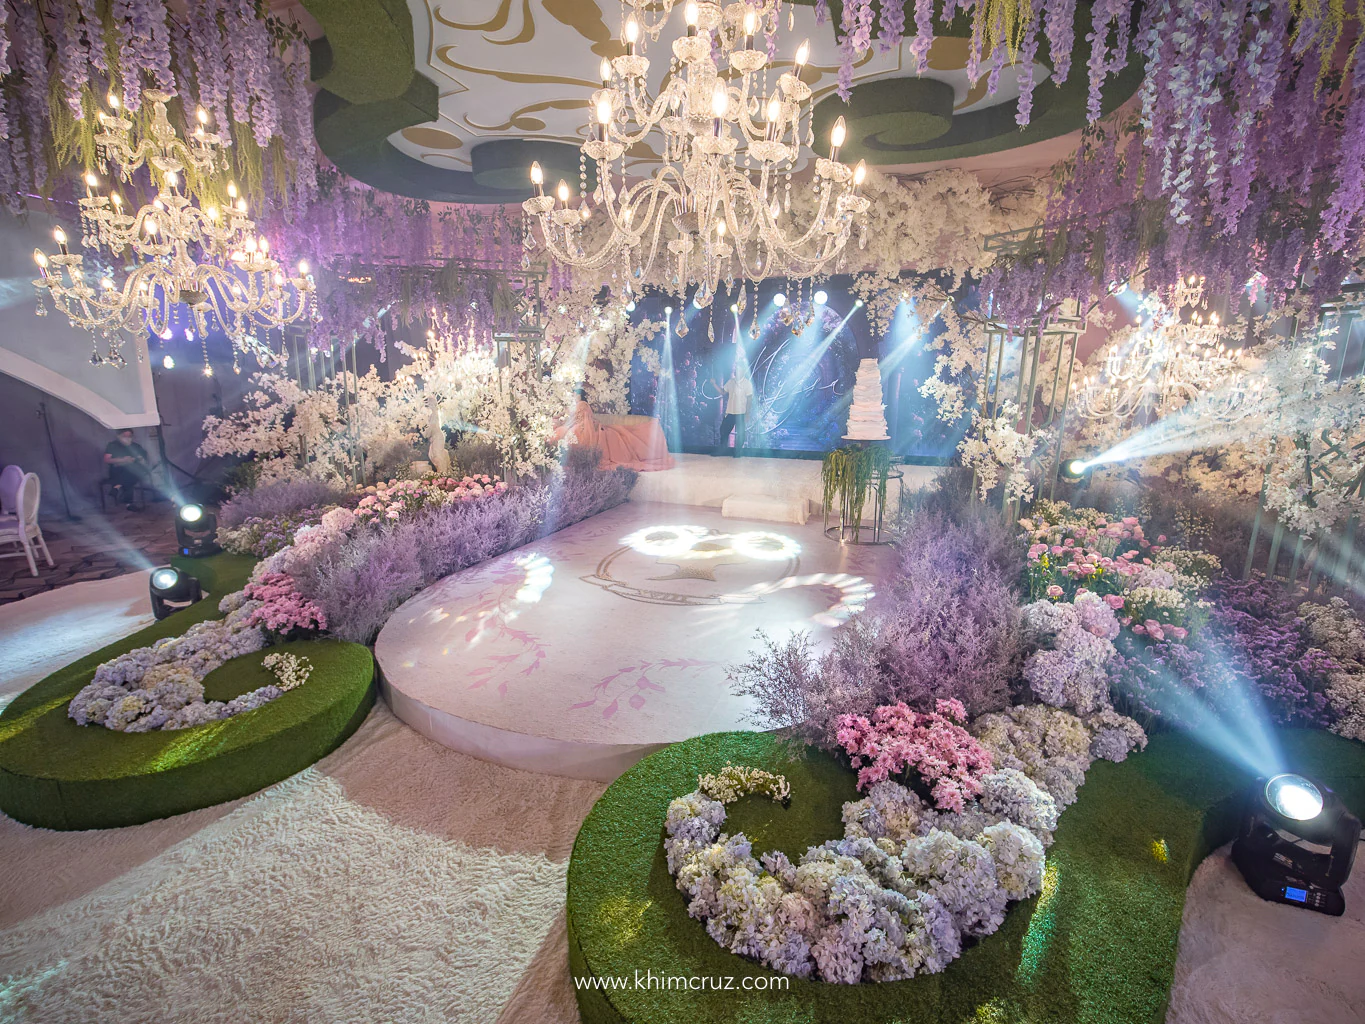 chateau gardens inspired debut party floral landscape with parterre design and chandeliers